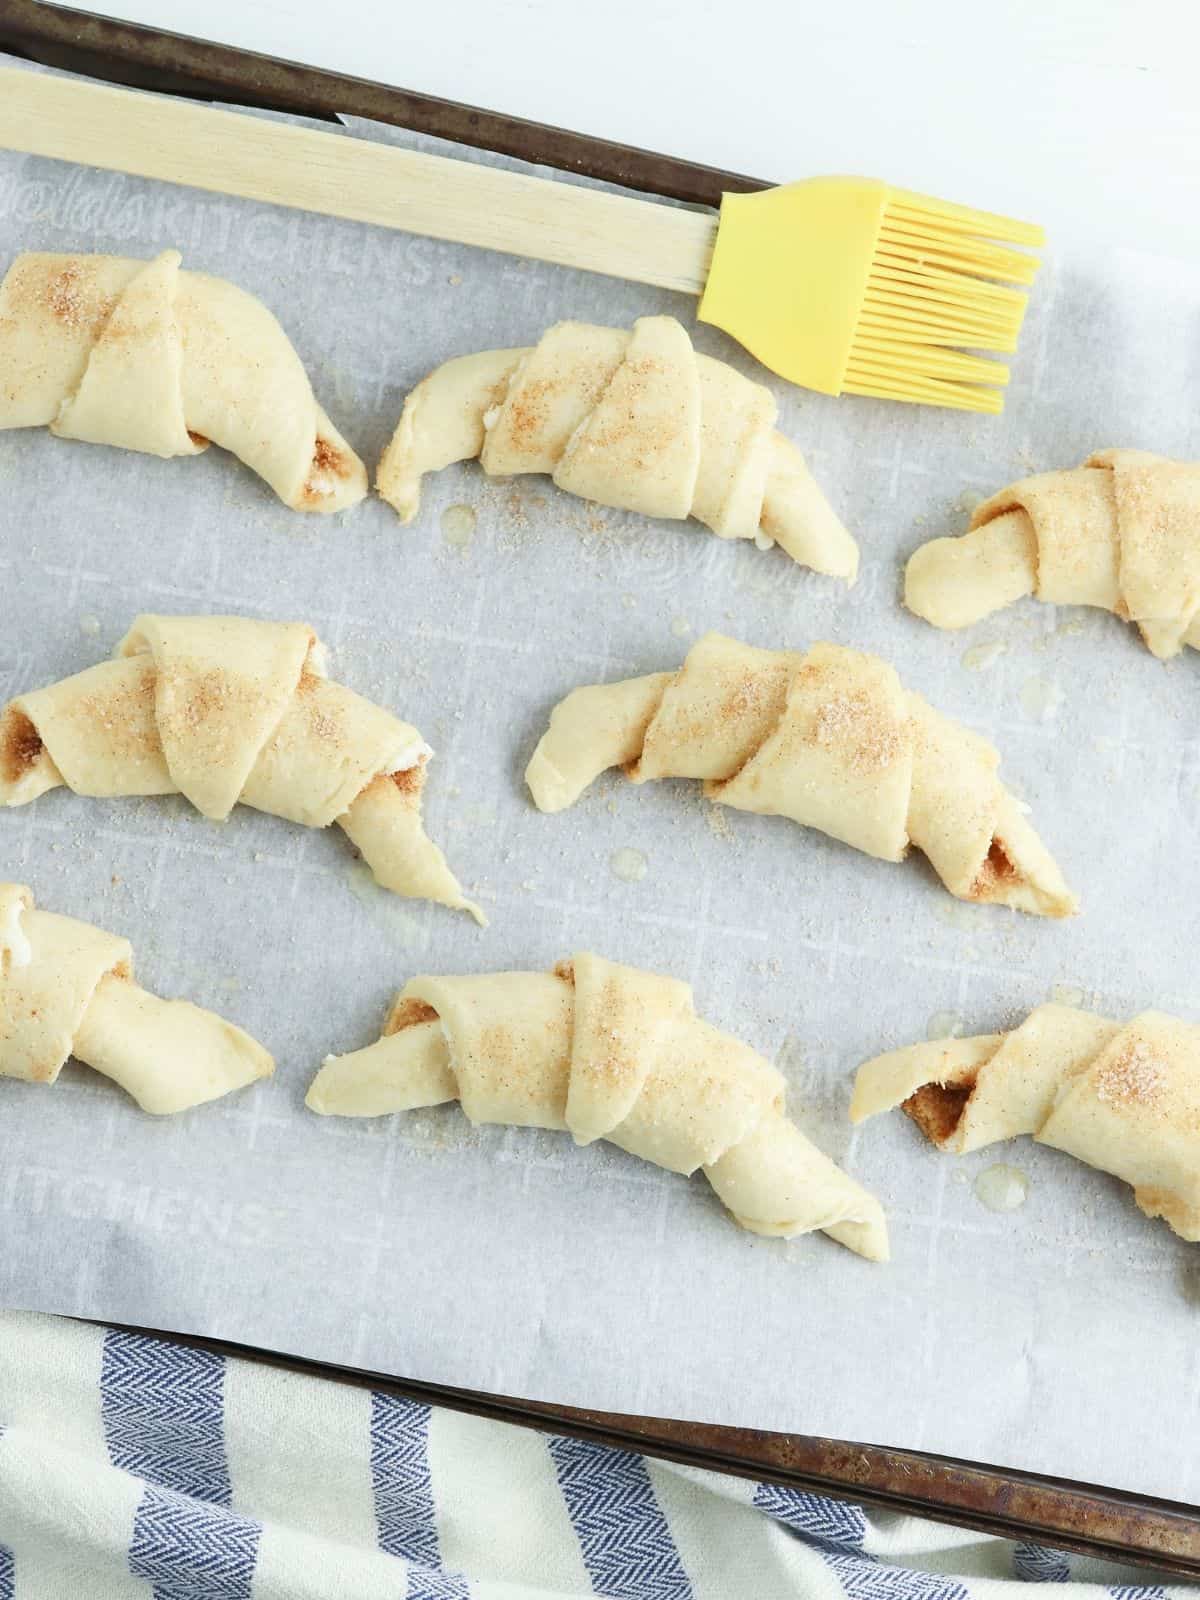 rolled up crescent rolls on baking tray lined with parchment paper.